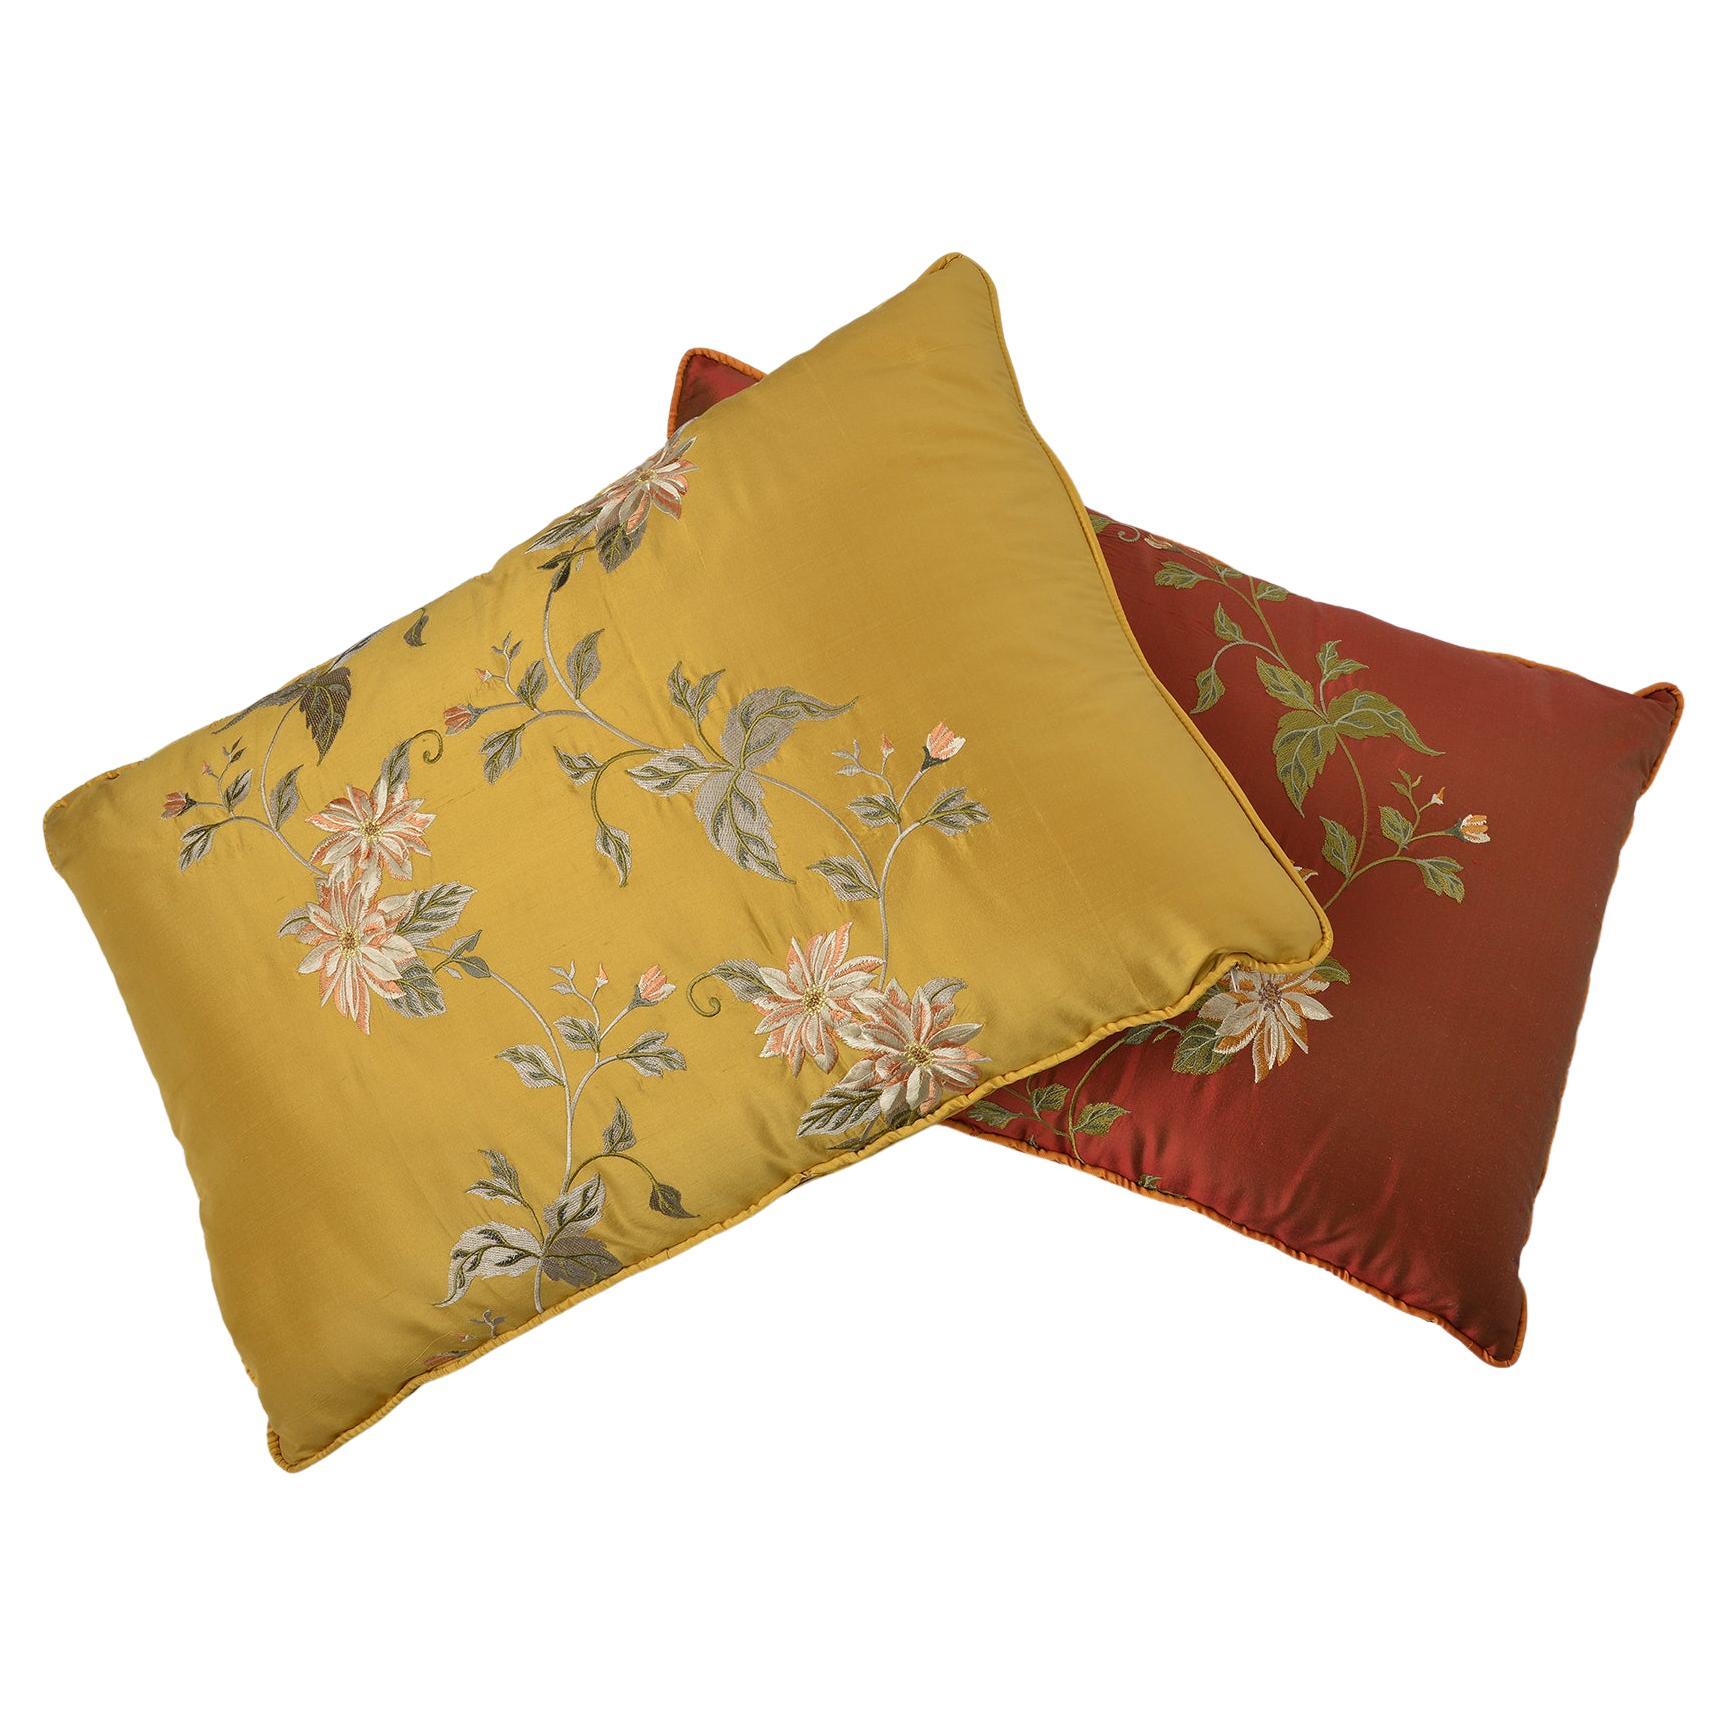 Pair of Embroidered Silk  Pillows